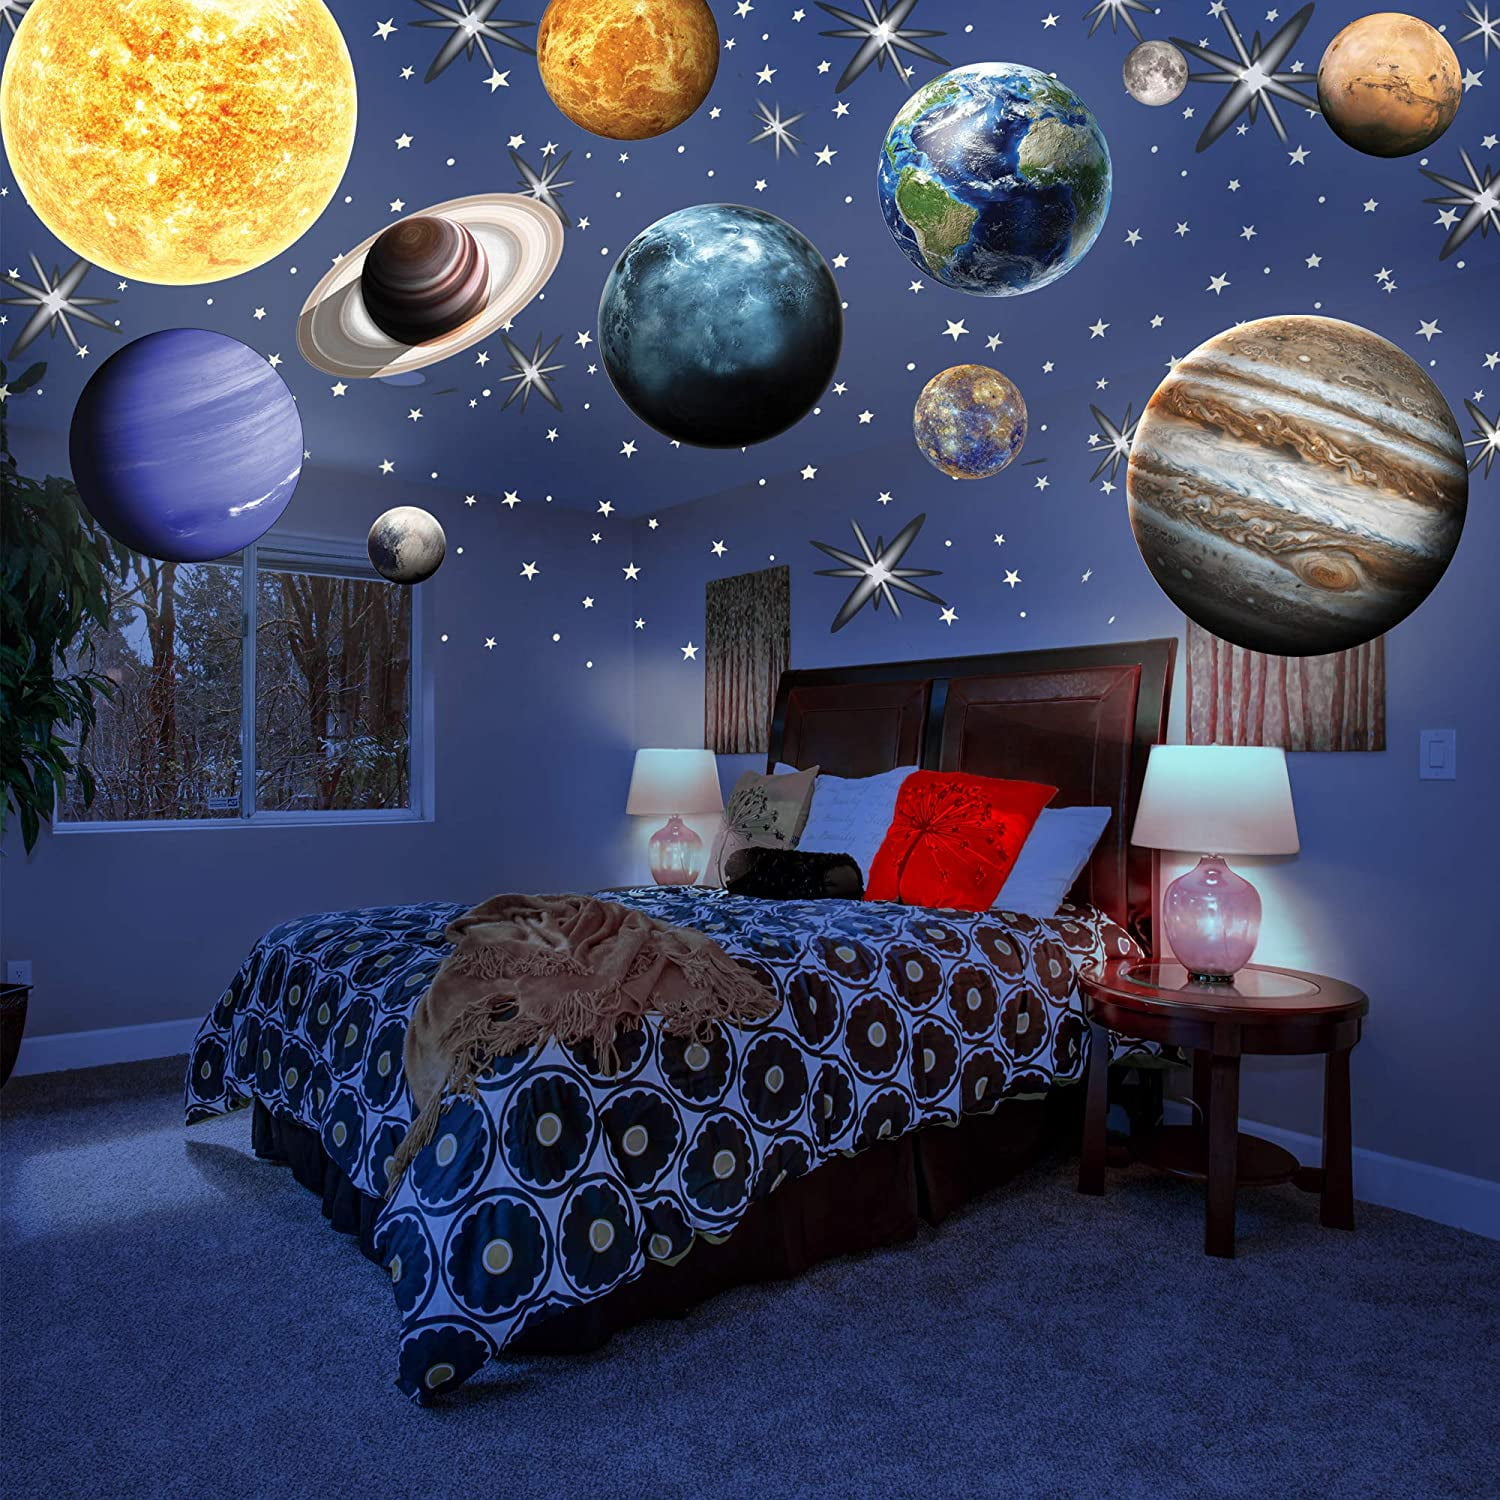 Shine Moon Planet Space Kid Wall Stickers Glow In The Dark Luminous Stars Decal 